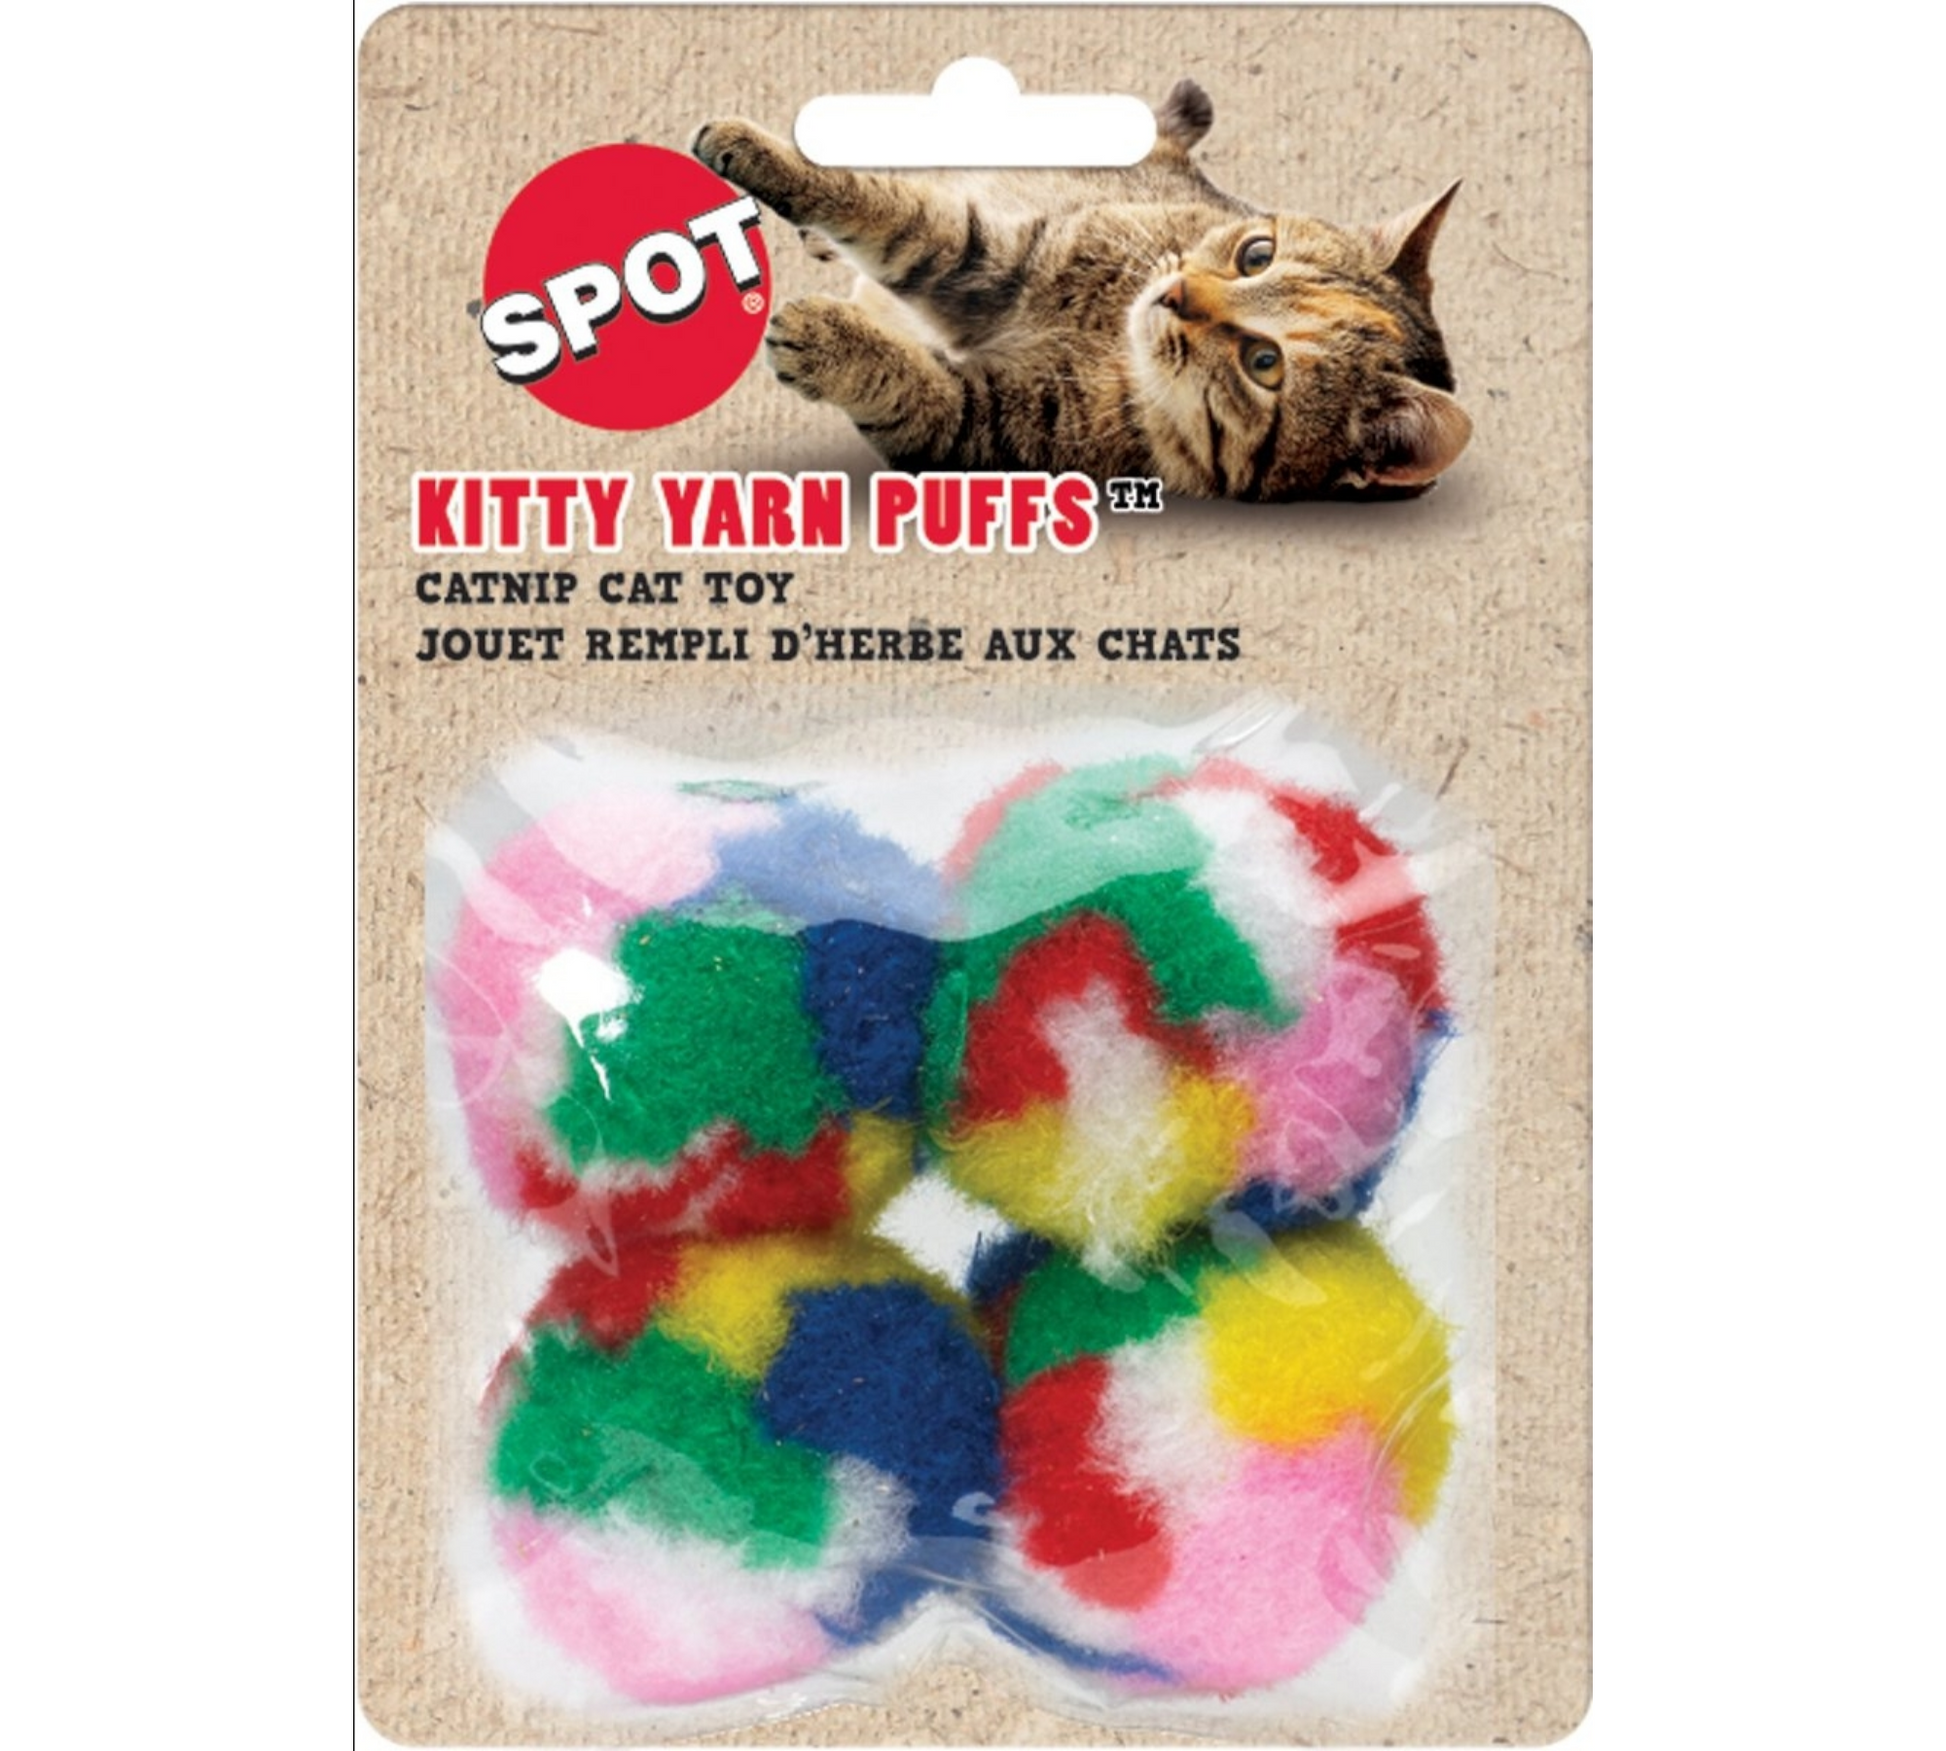 Canine's World Cat Balls & Chasers Spot Pet Kitty Yarn Puffs Small Balls Cat Toy with Catnip, Color Varies, 1.5-in, 4 count Spot